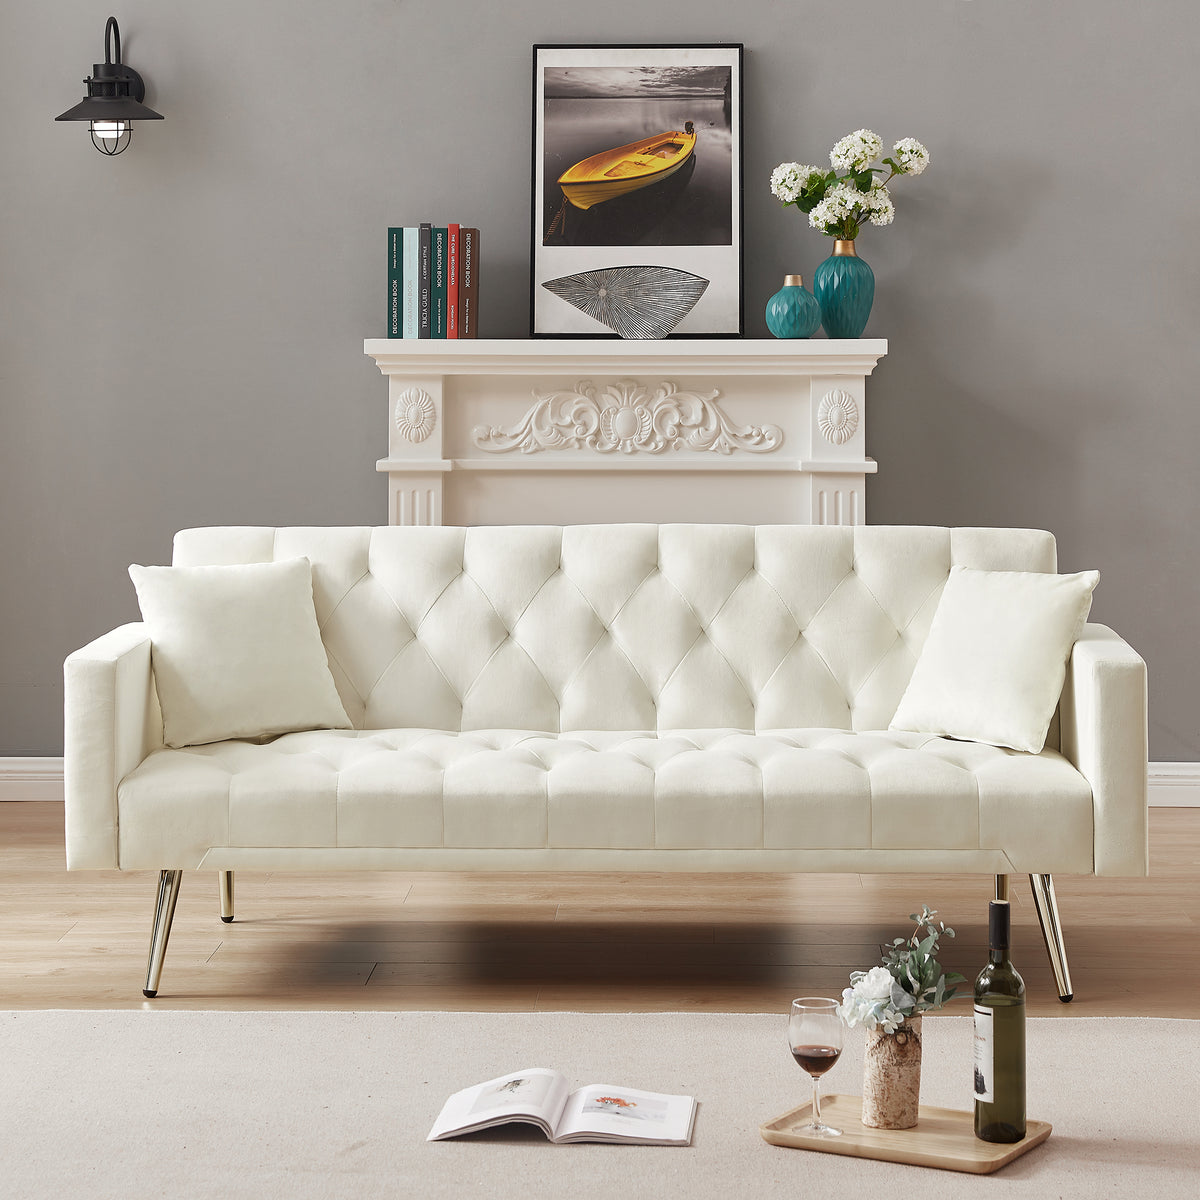 Convertible Folding Futon Sofa Bed, Sleeper Sofa Couch for Compact Living Space - Cream White